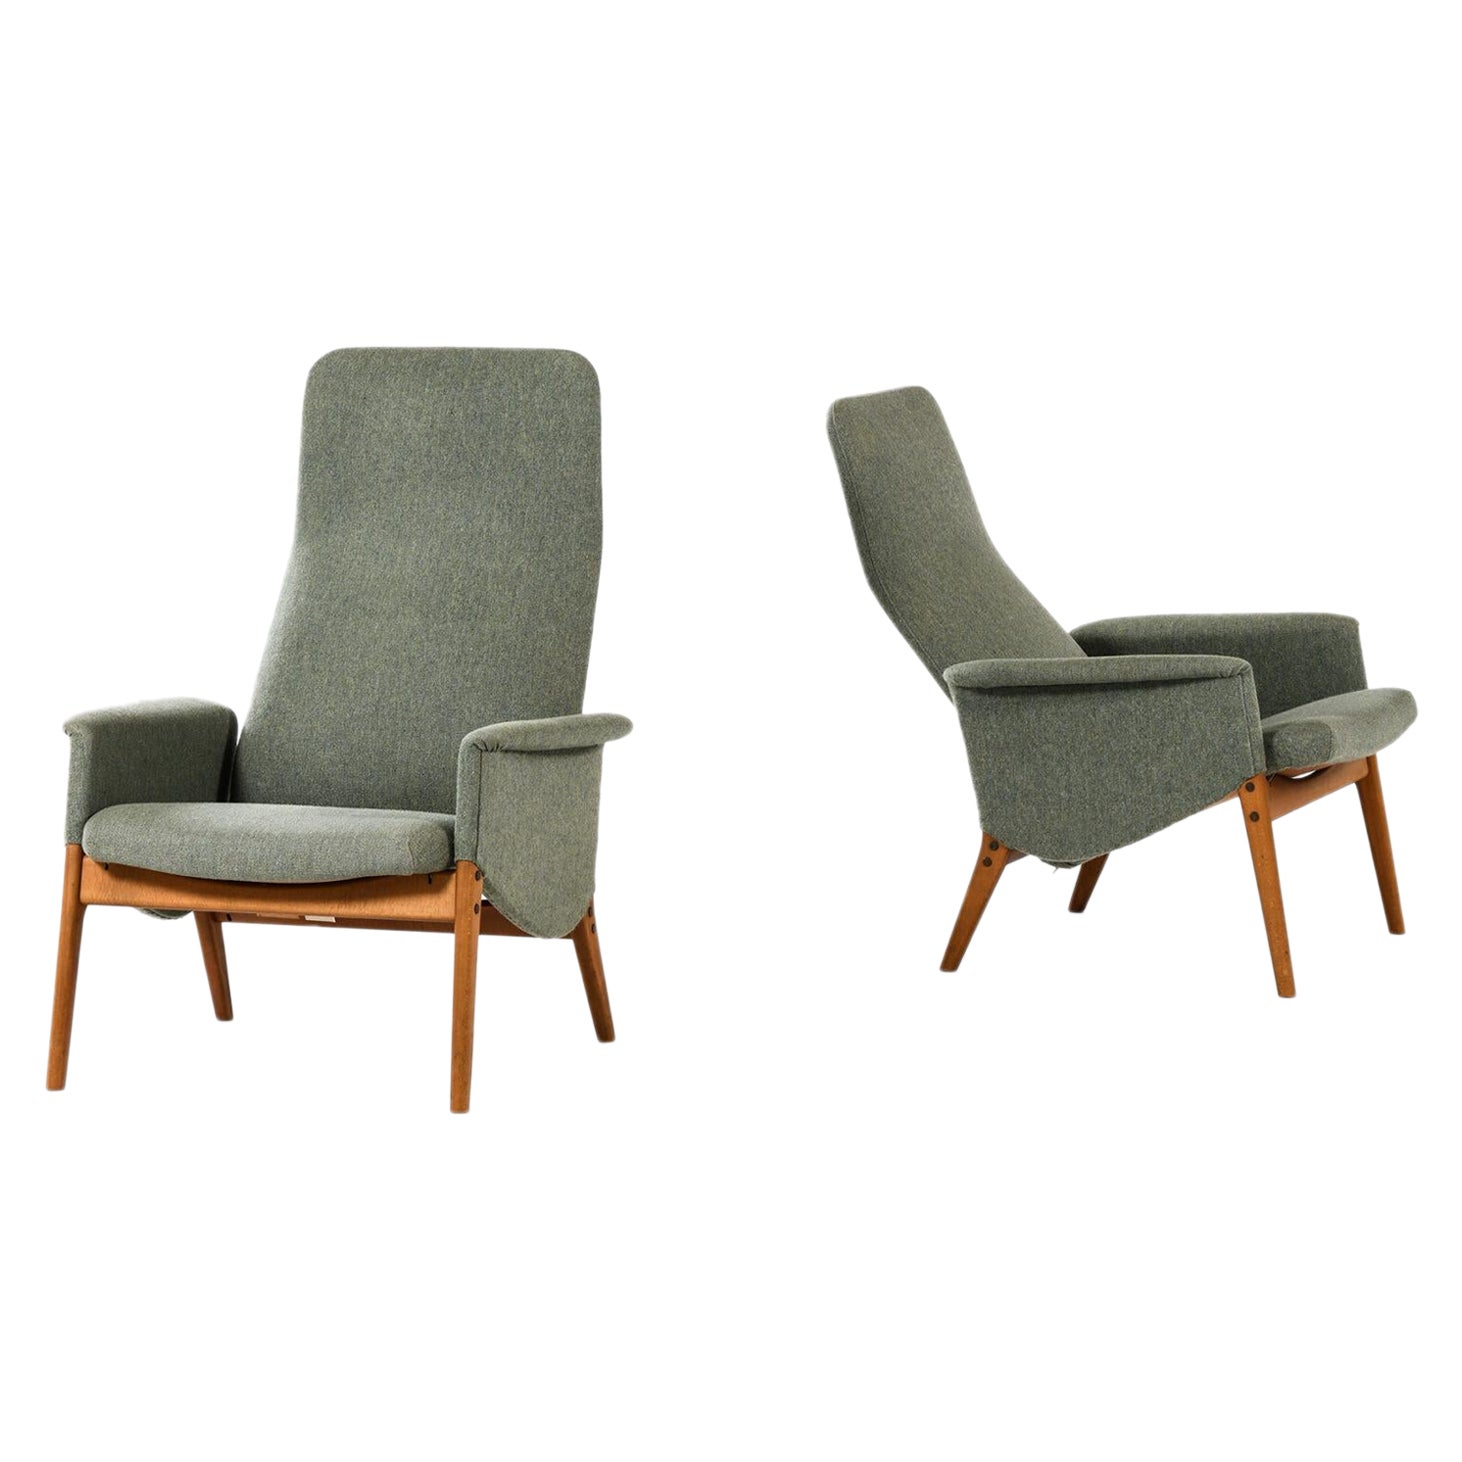 Alf Svensson Easy Chairs Model 4332 Produced by Fritz Hansen